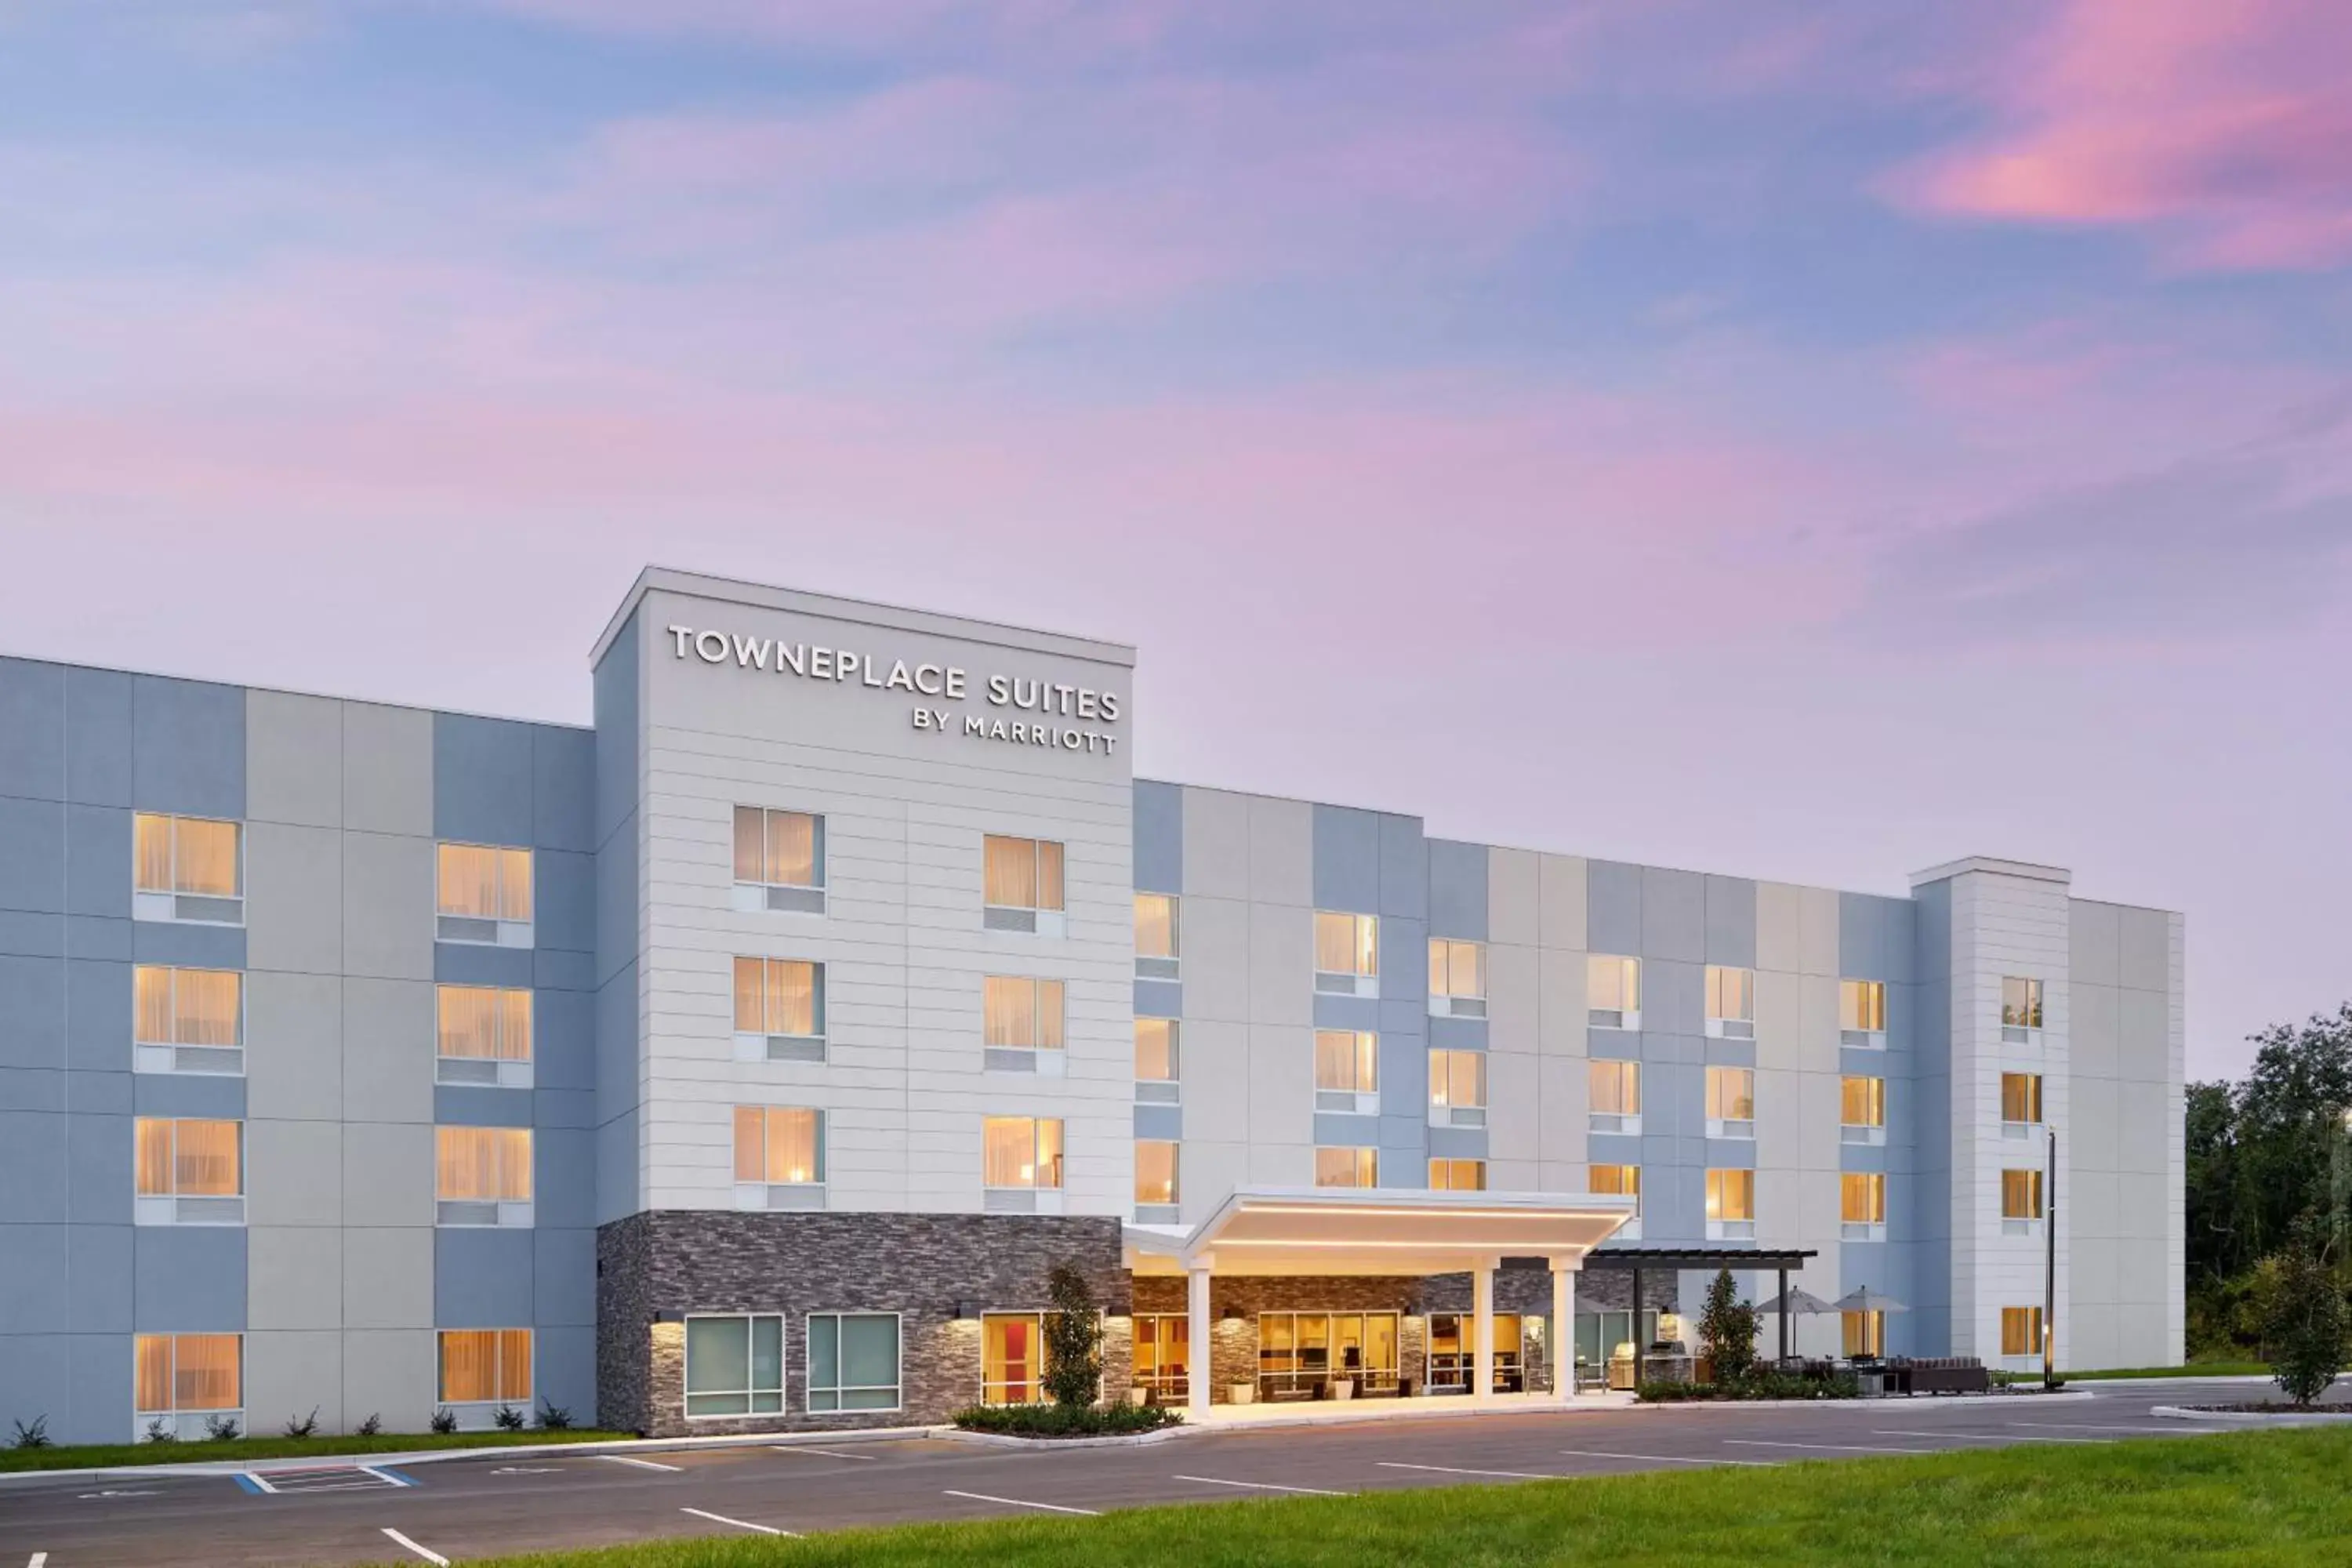 Property Building in TownePlace Suites by Marriott Leesburg